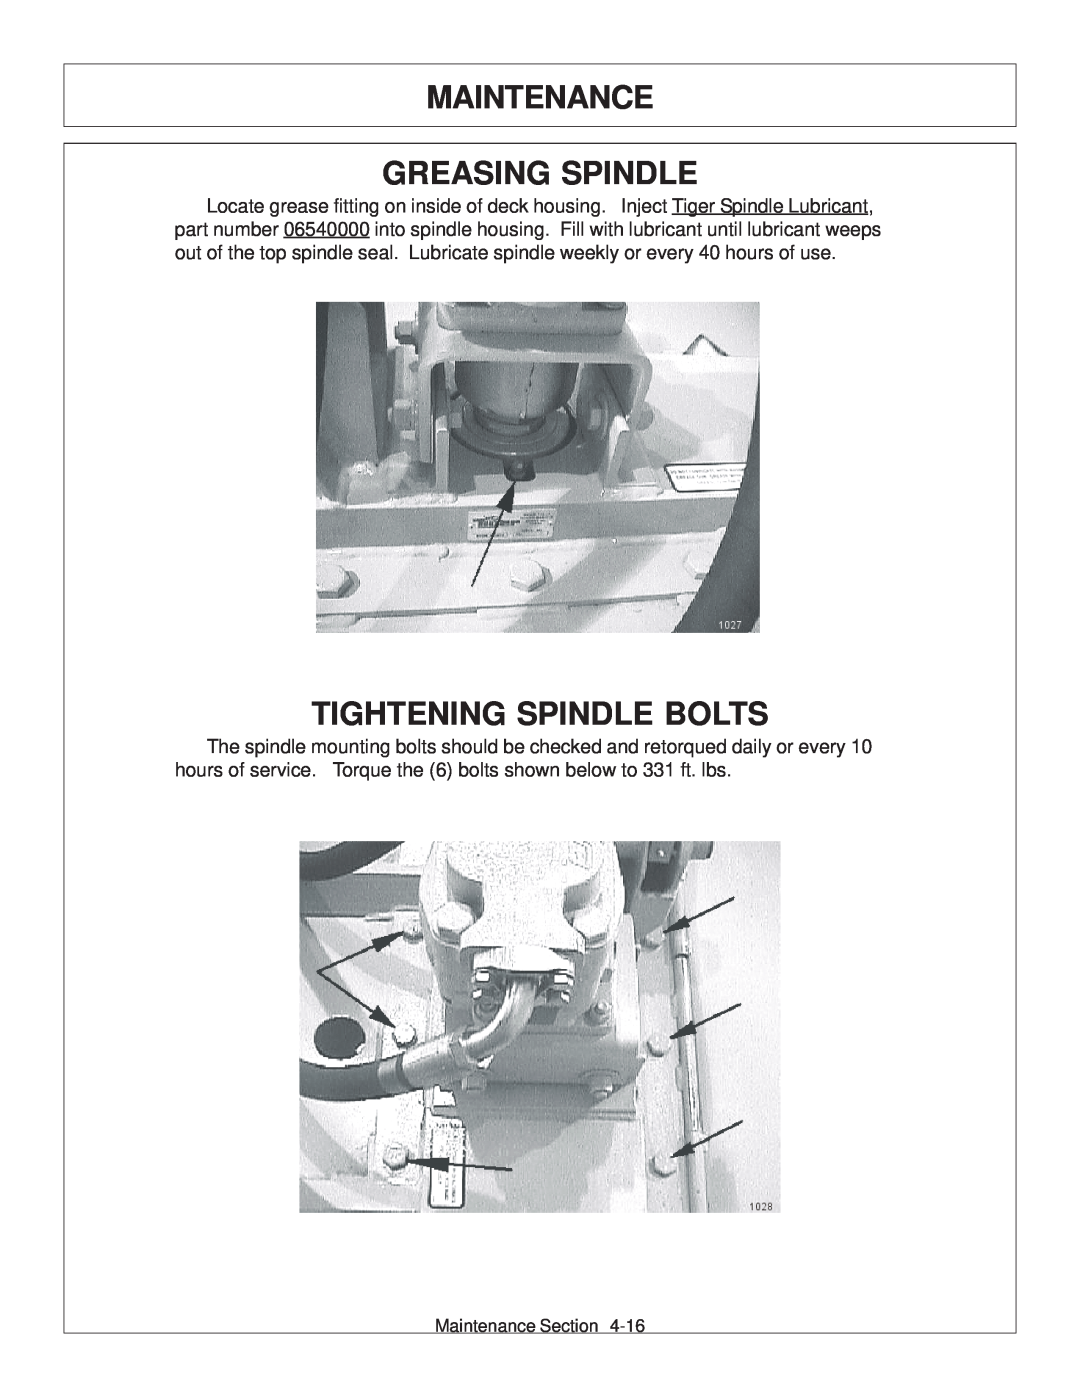 Tiger Products Co., Ltd TS 100A manual Maintenance Greasing Spindle, Tightening Spindle Bolts 